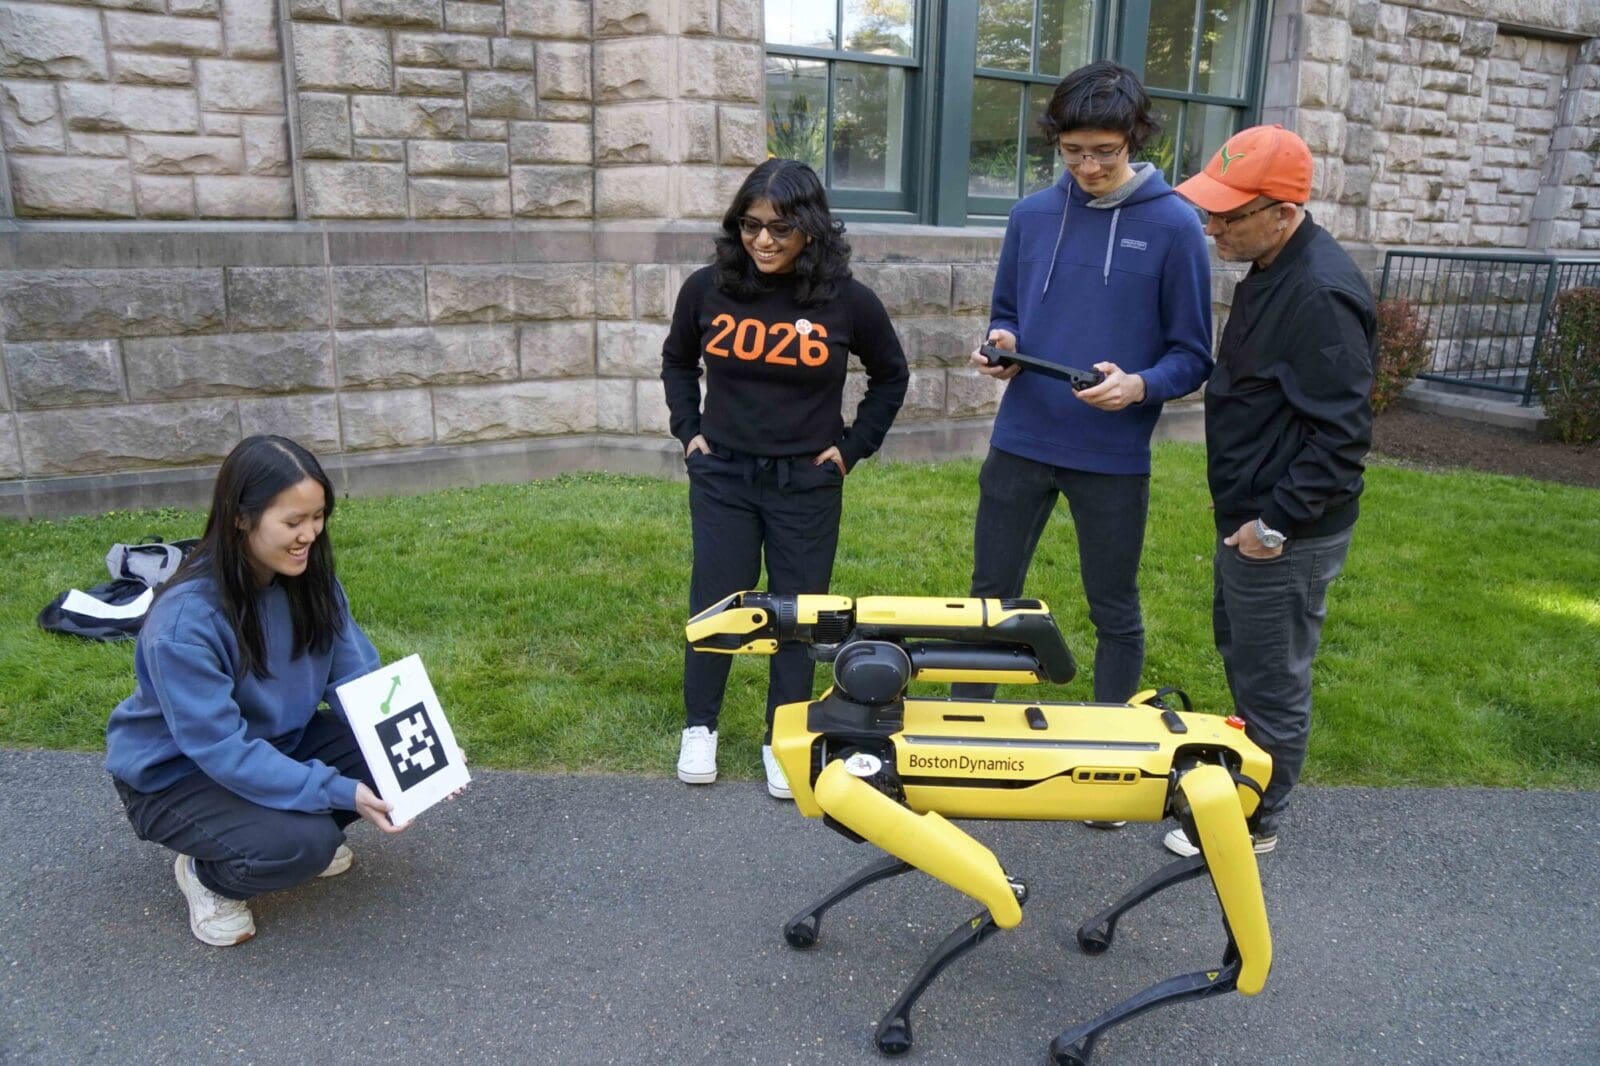 Vivian Chen holds large QR code as Vasumathi Venkat, Aaron Serianni, and Alex Glaser look on, and the robot dog faces the QR code.